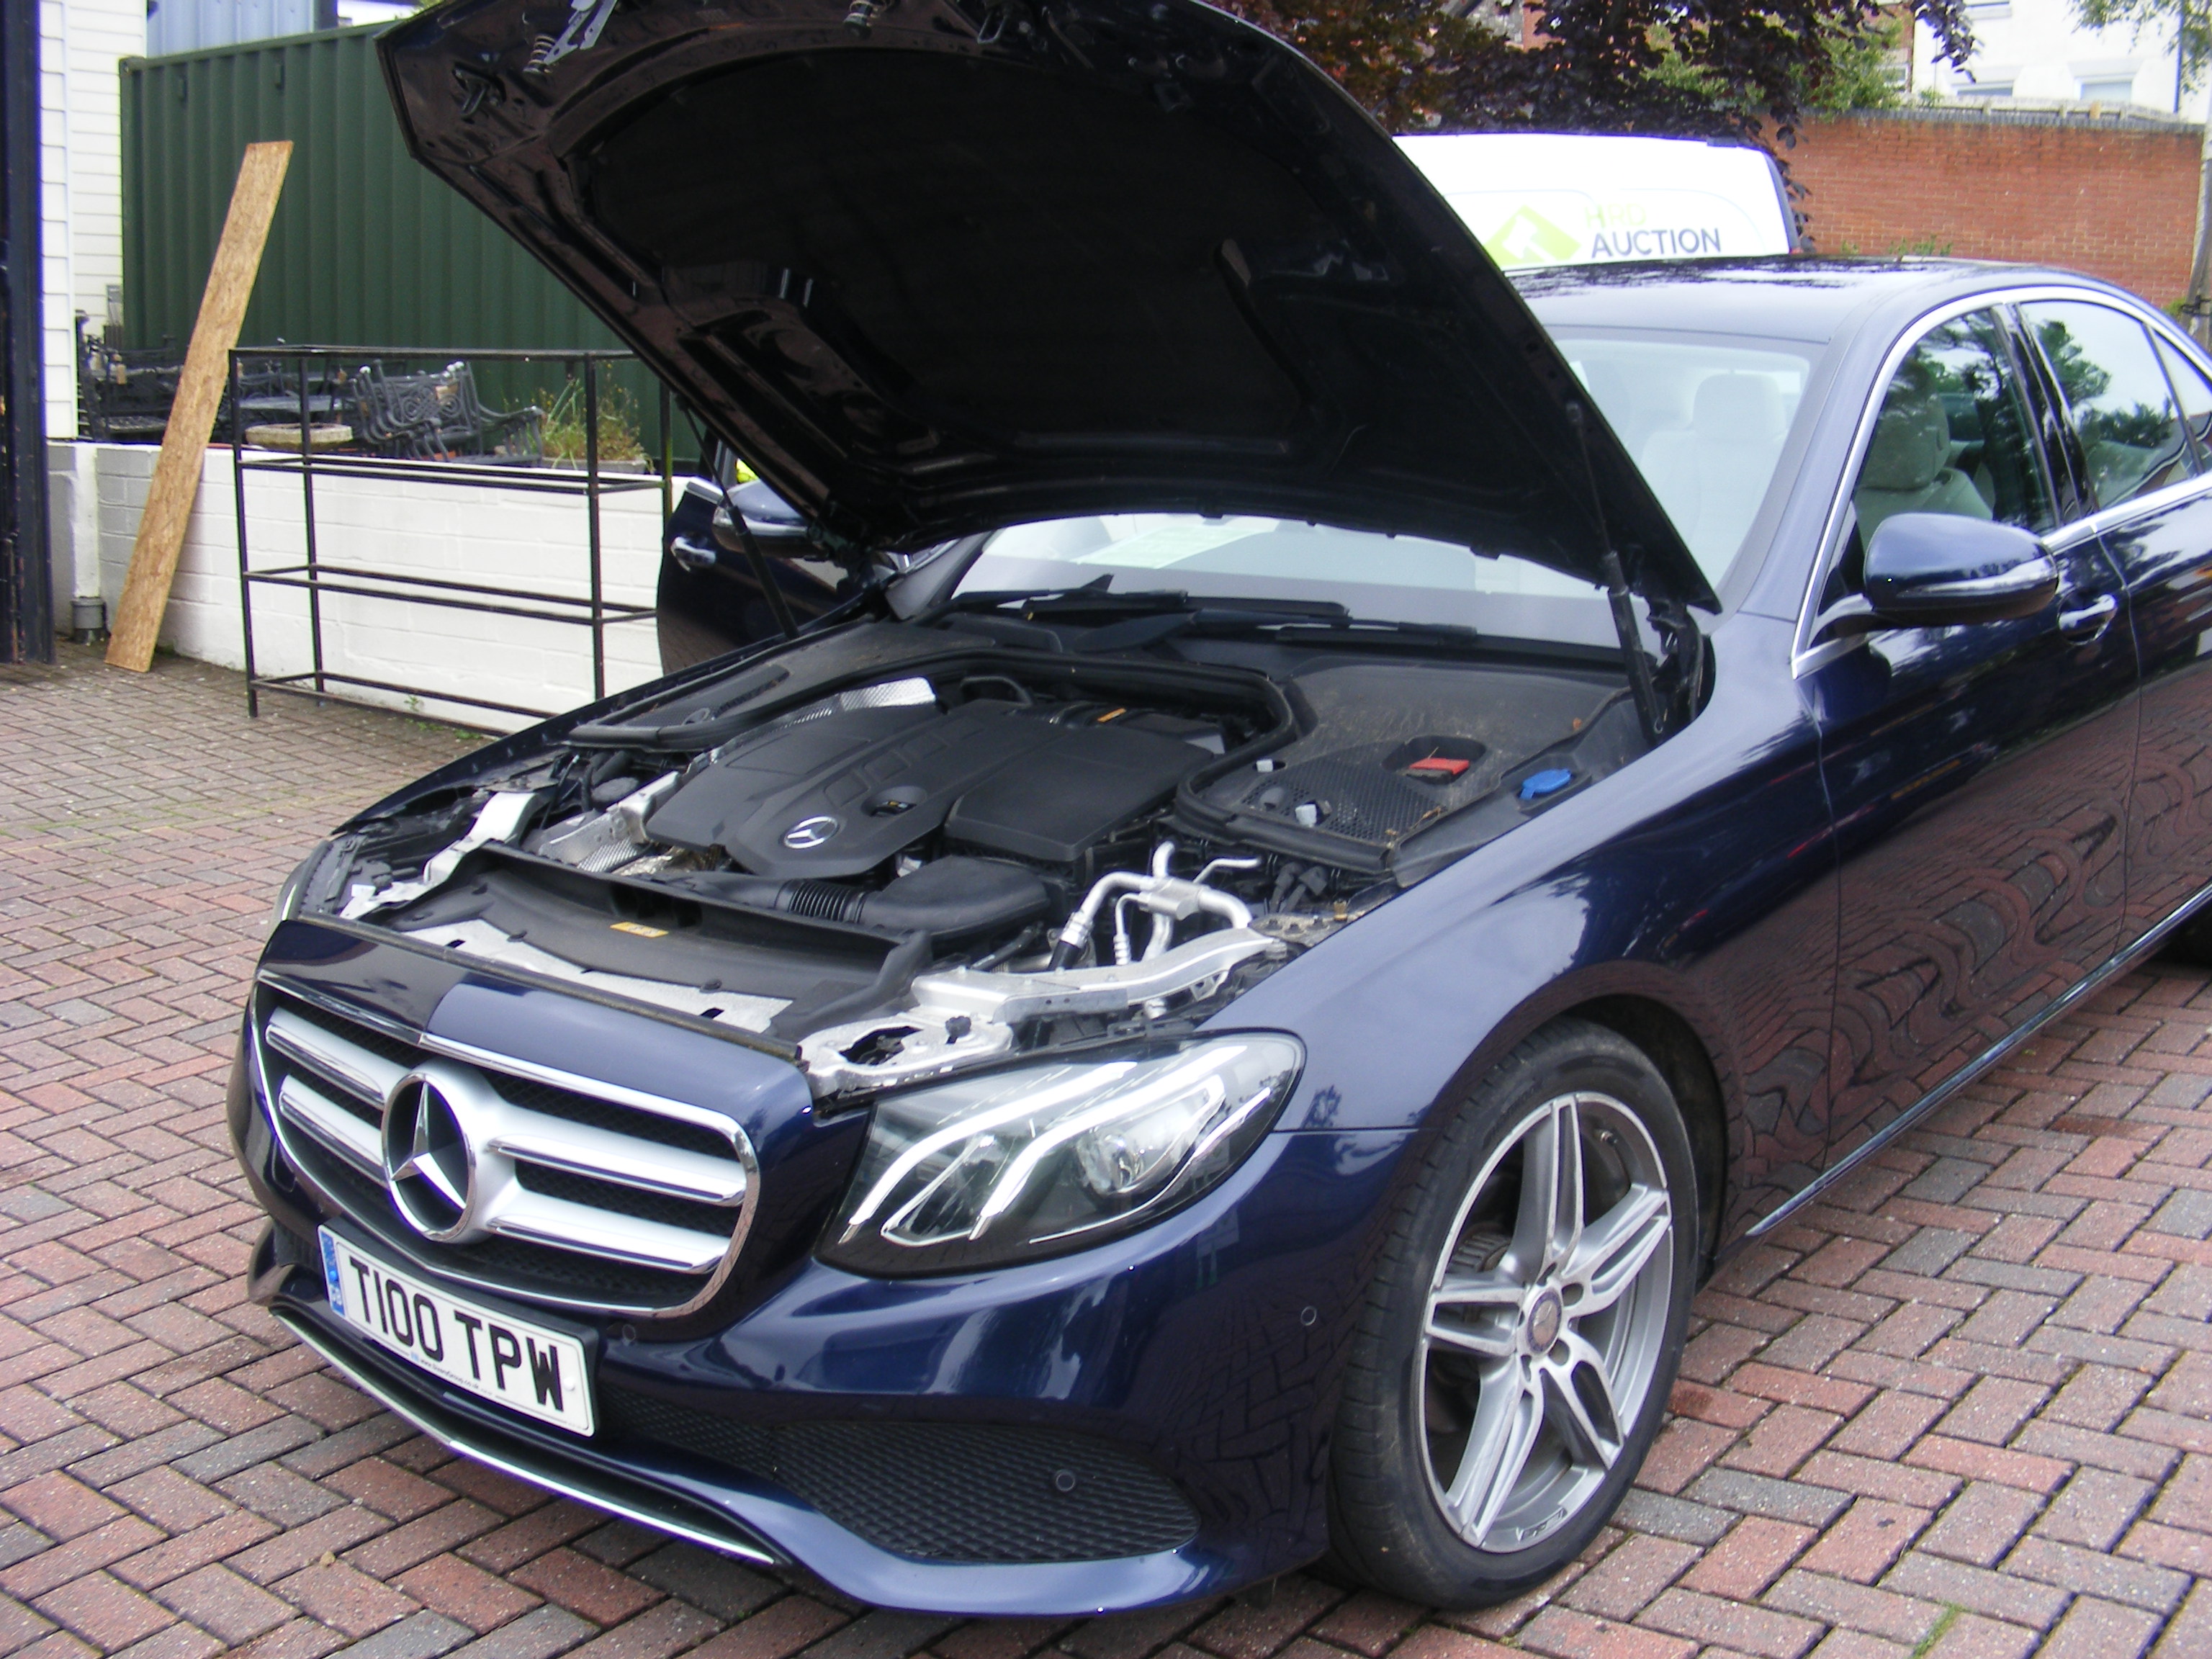 FROM A DECEASED'S ESTATE - Mercedes-Benz E 220 D S - Image 44 of 44